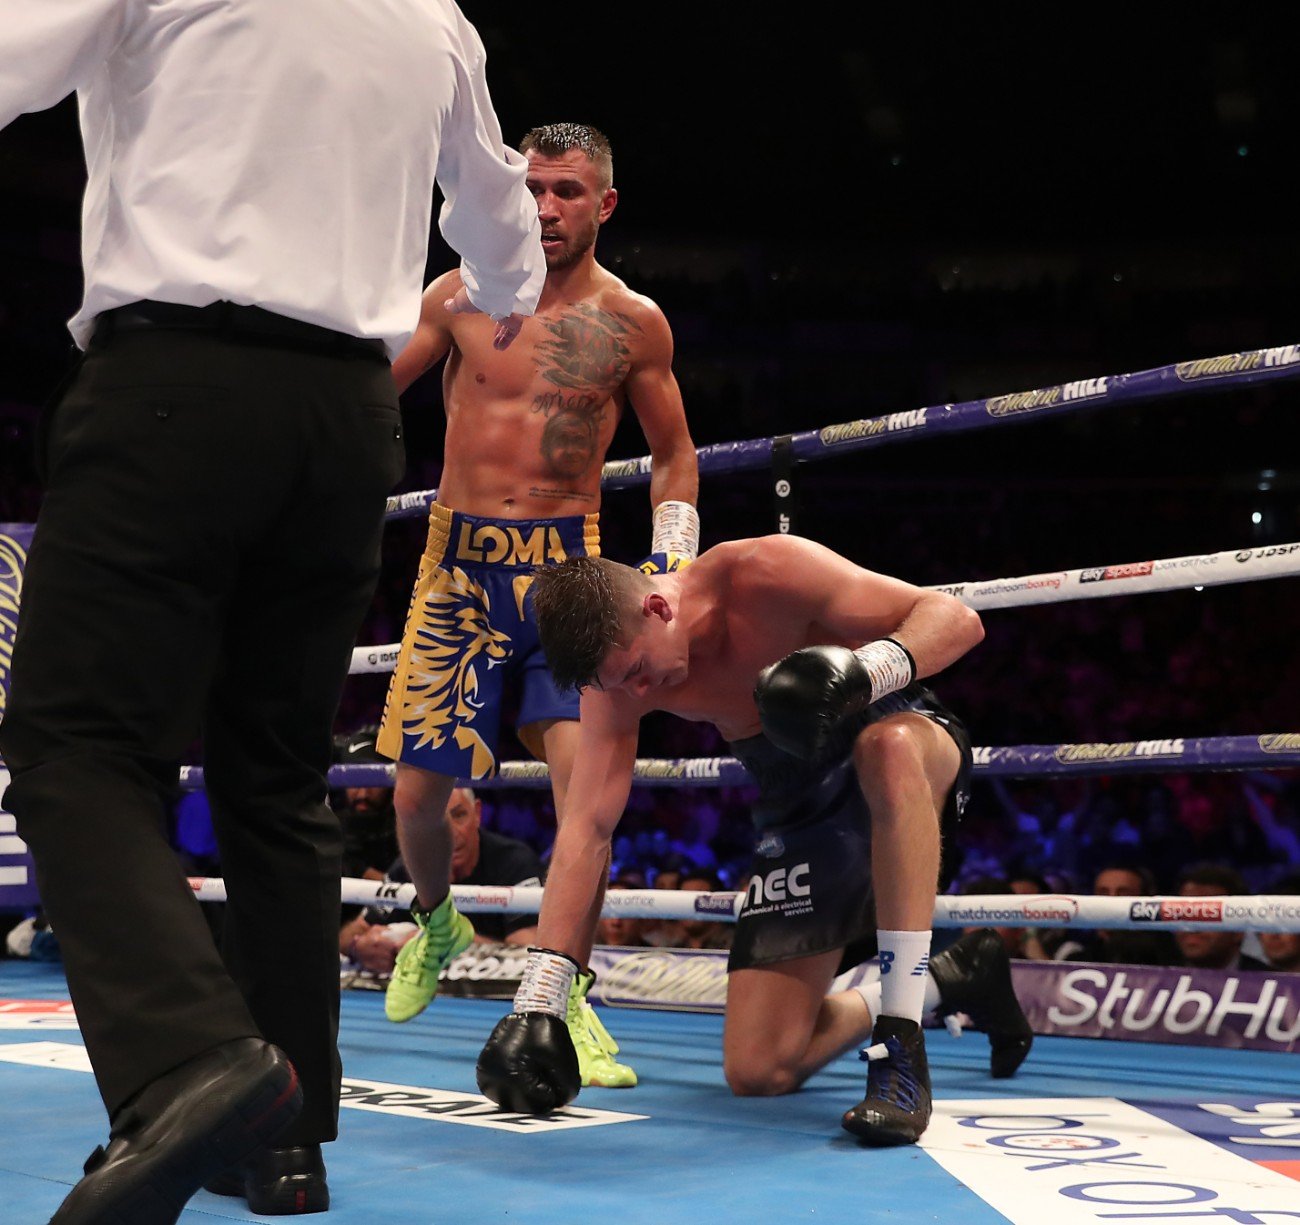 Image: Haney slams Luke Campbell over his comments